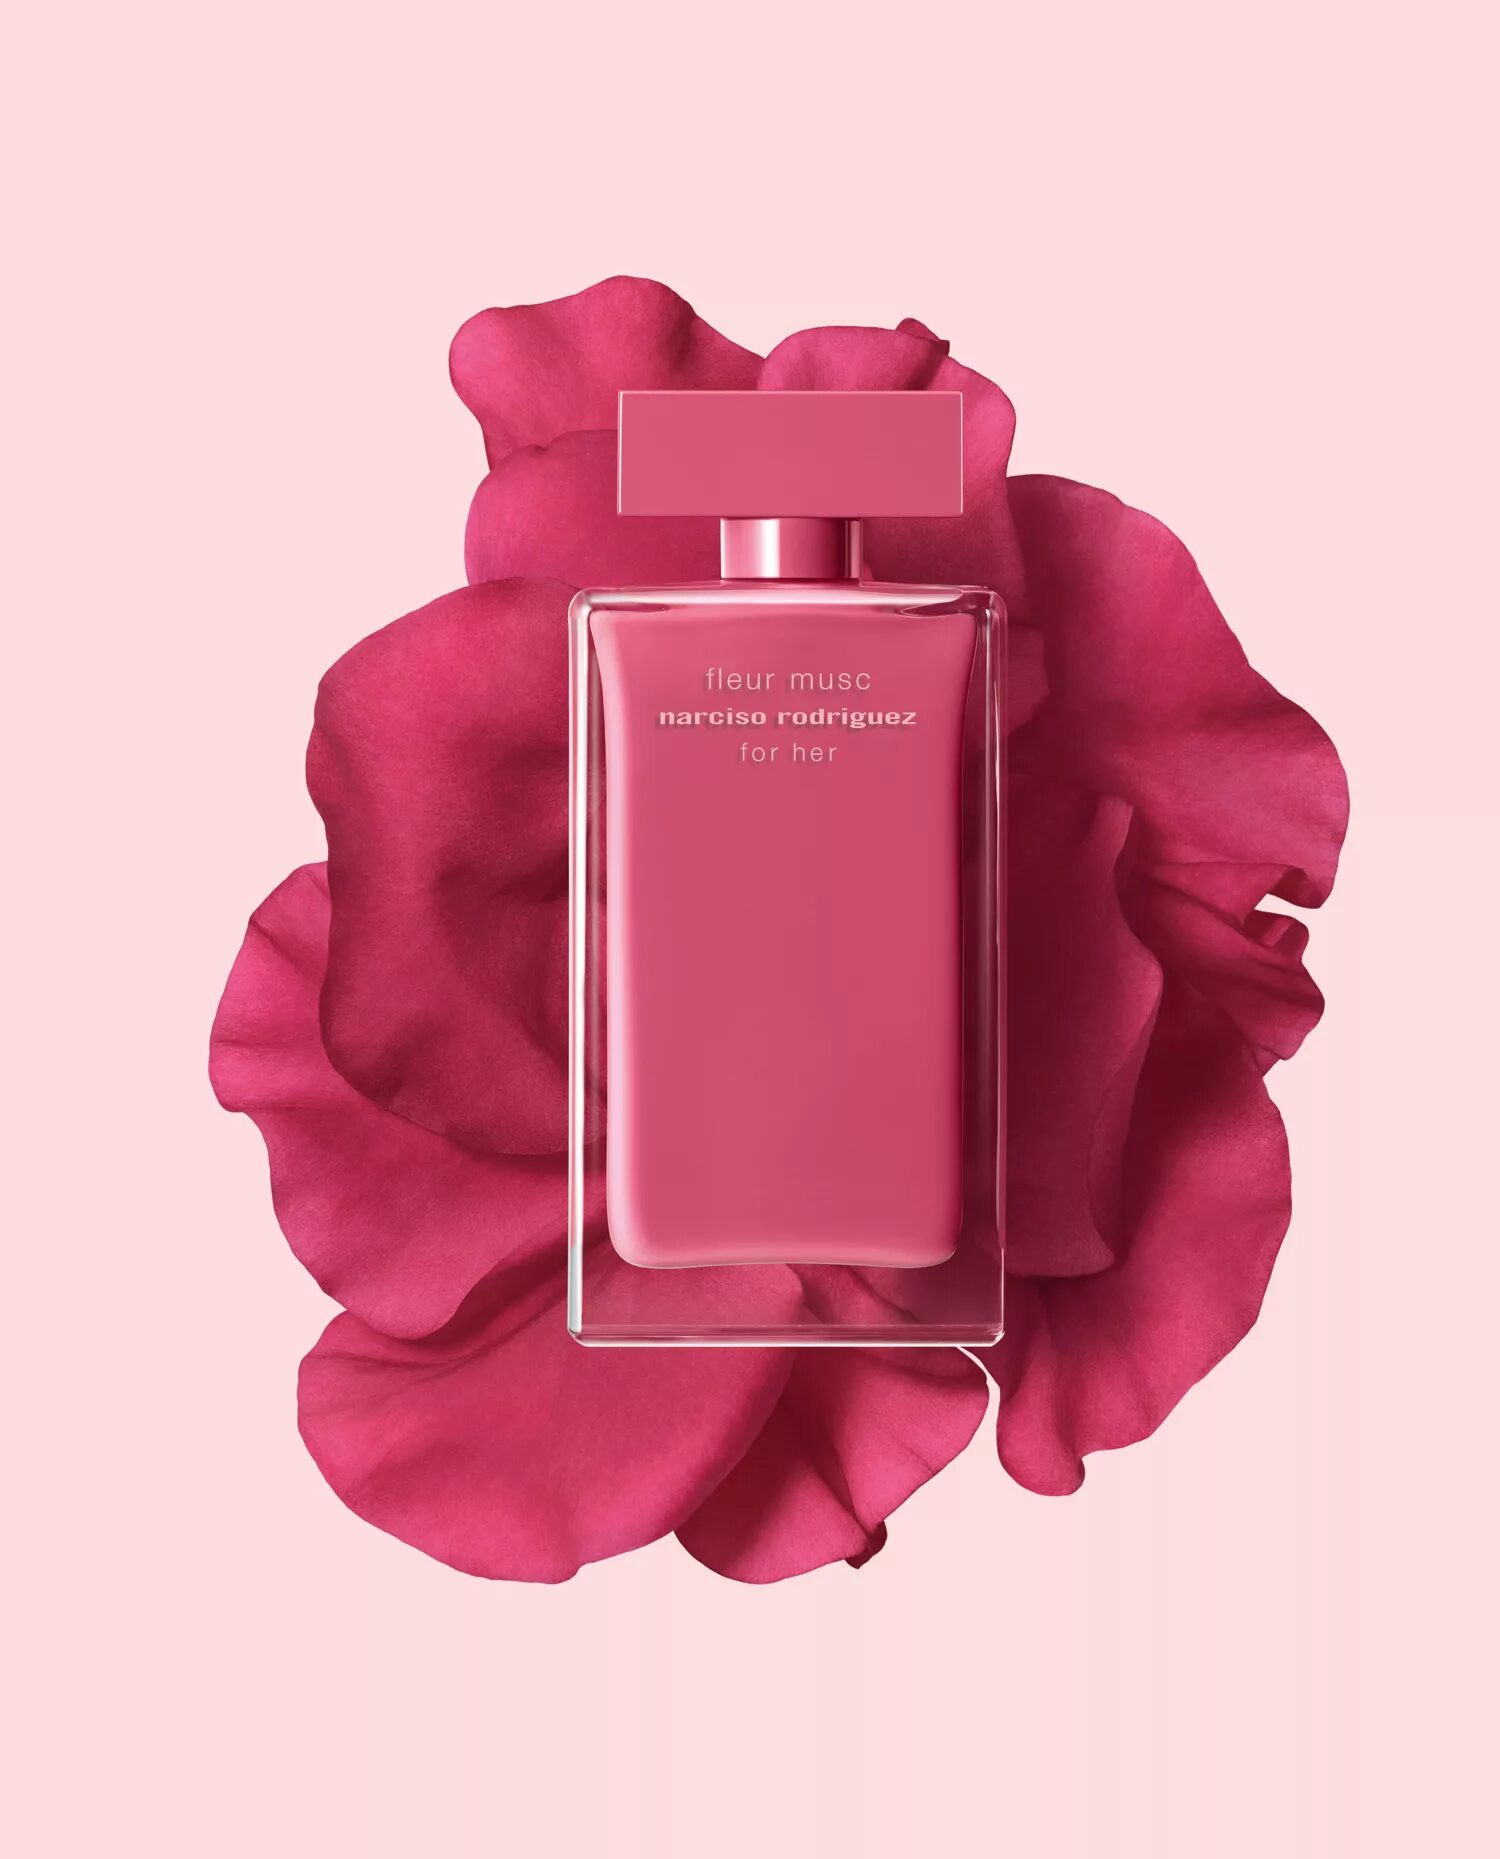 Fleur Musc Narciso Rodriguez for her. Narciso Rodriguez fleur Musc for her 100 мл. Парфюмированная вода fleur Musc Narciso Rodriguez. Narciso Rodriguez fleur Musc 100 мл. Родригес флер